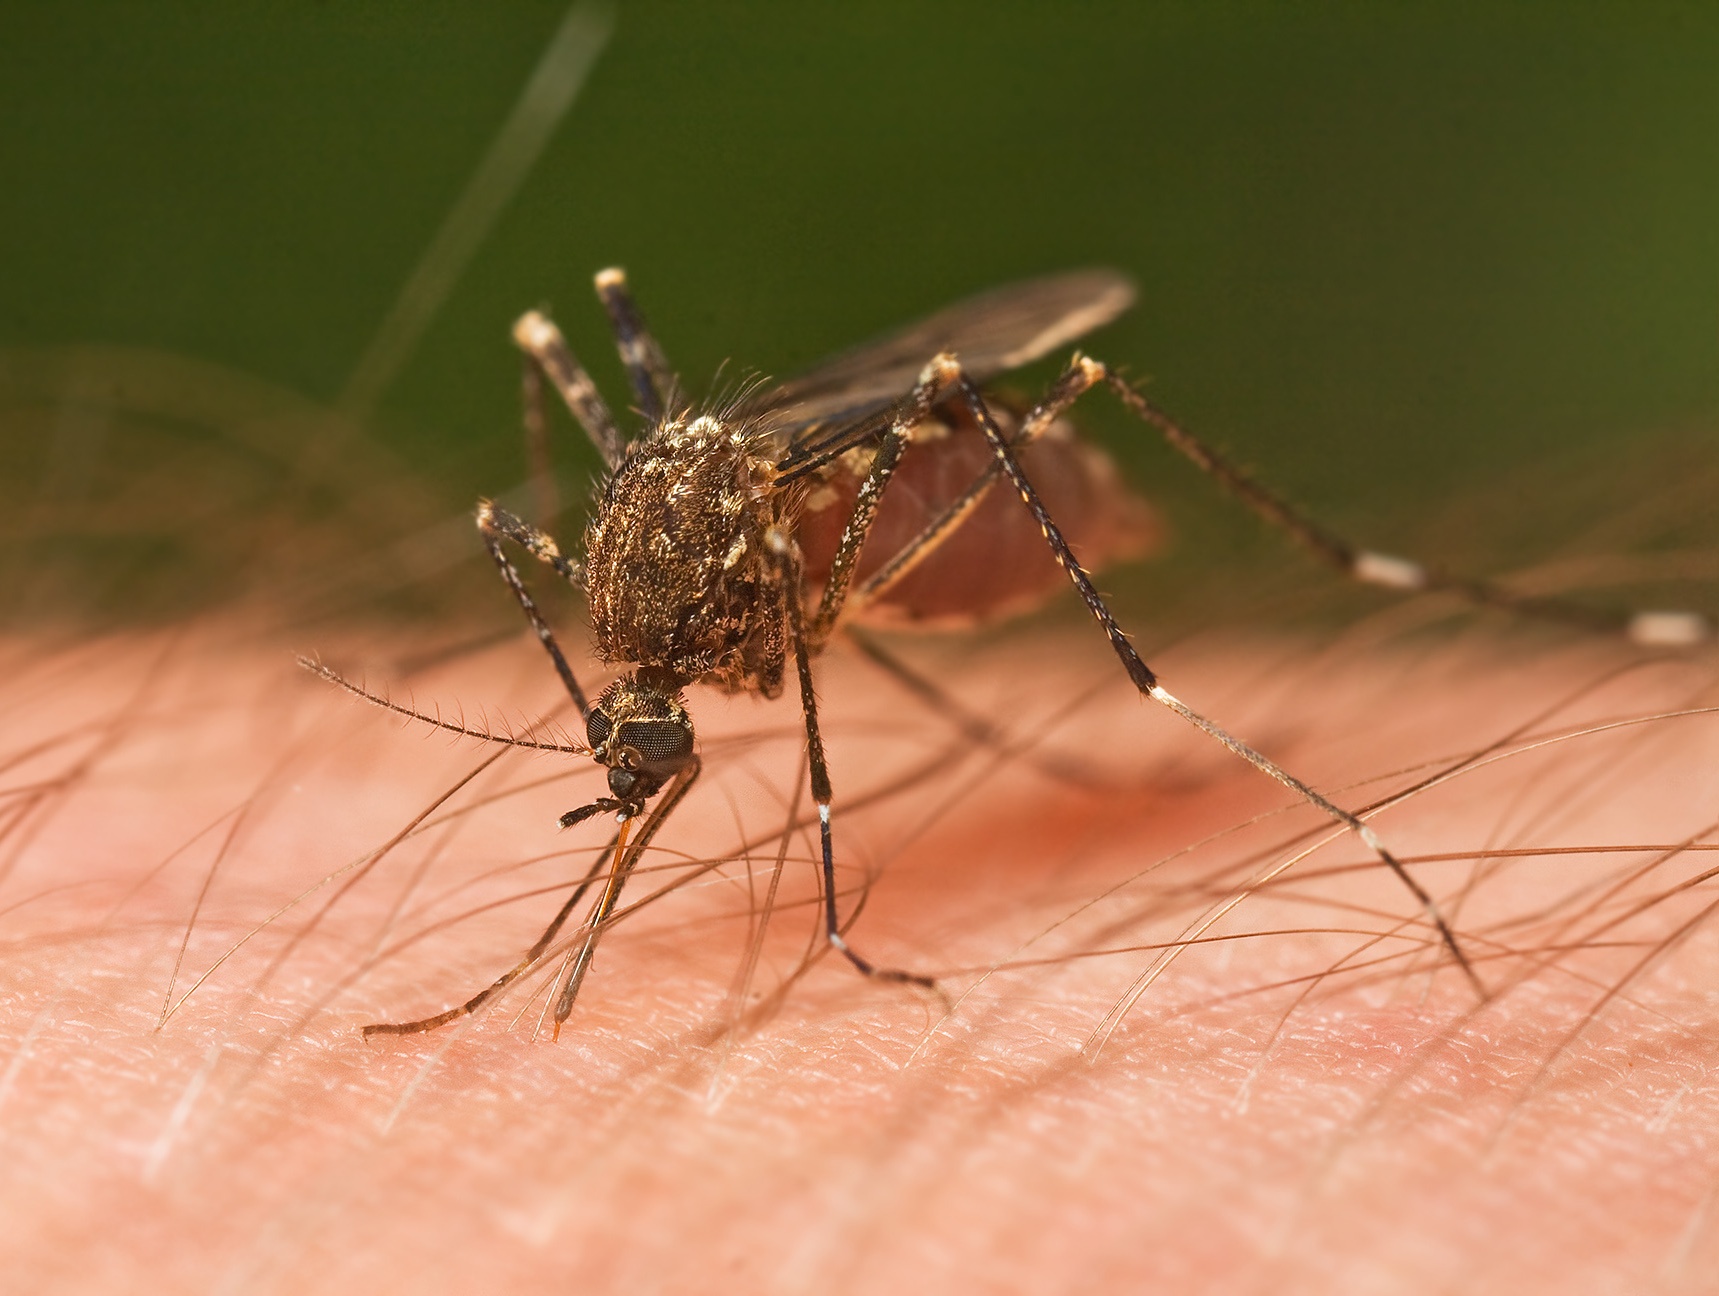 There are quite a few interesting mosquito facts.